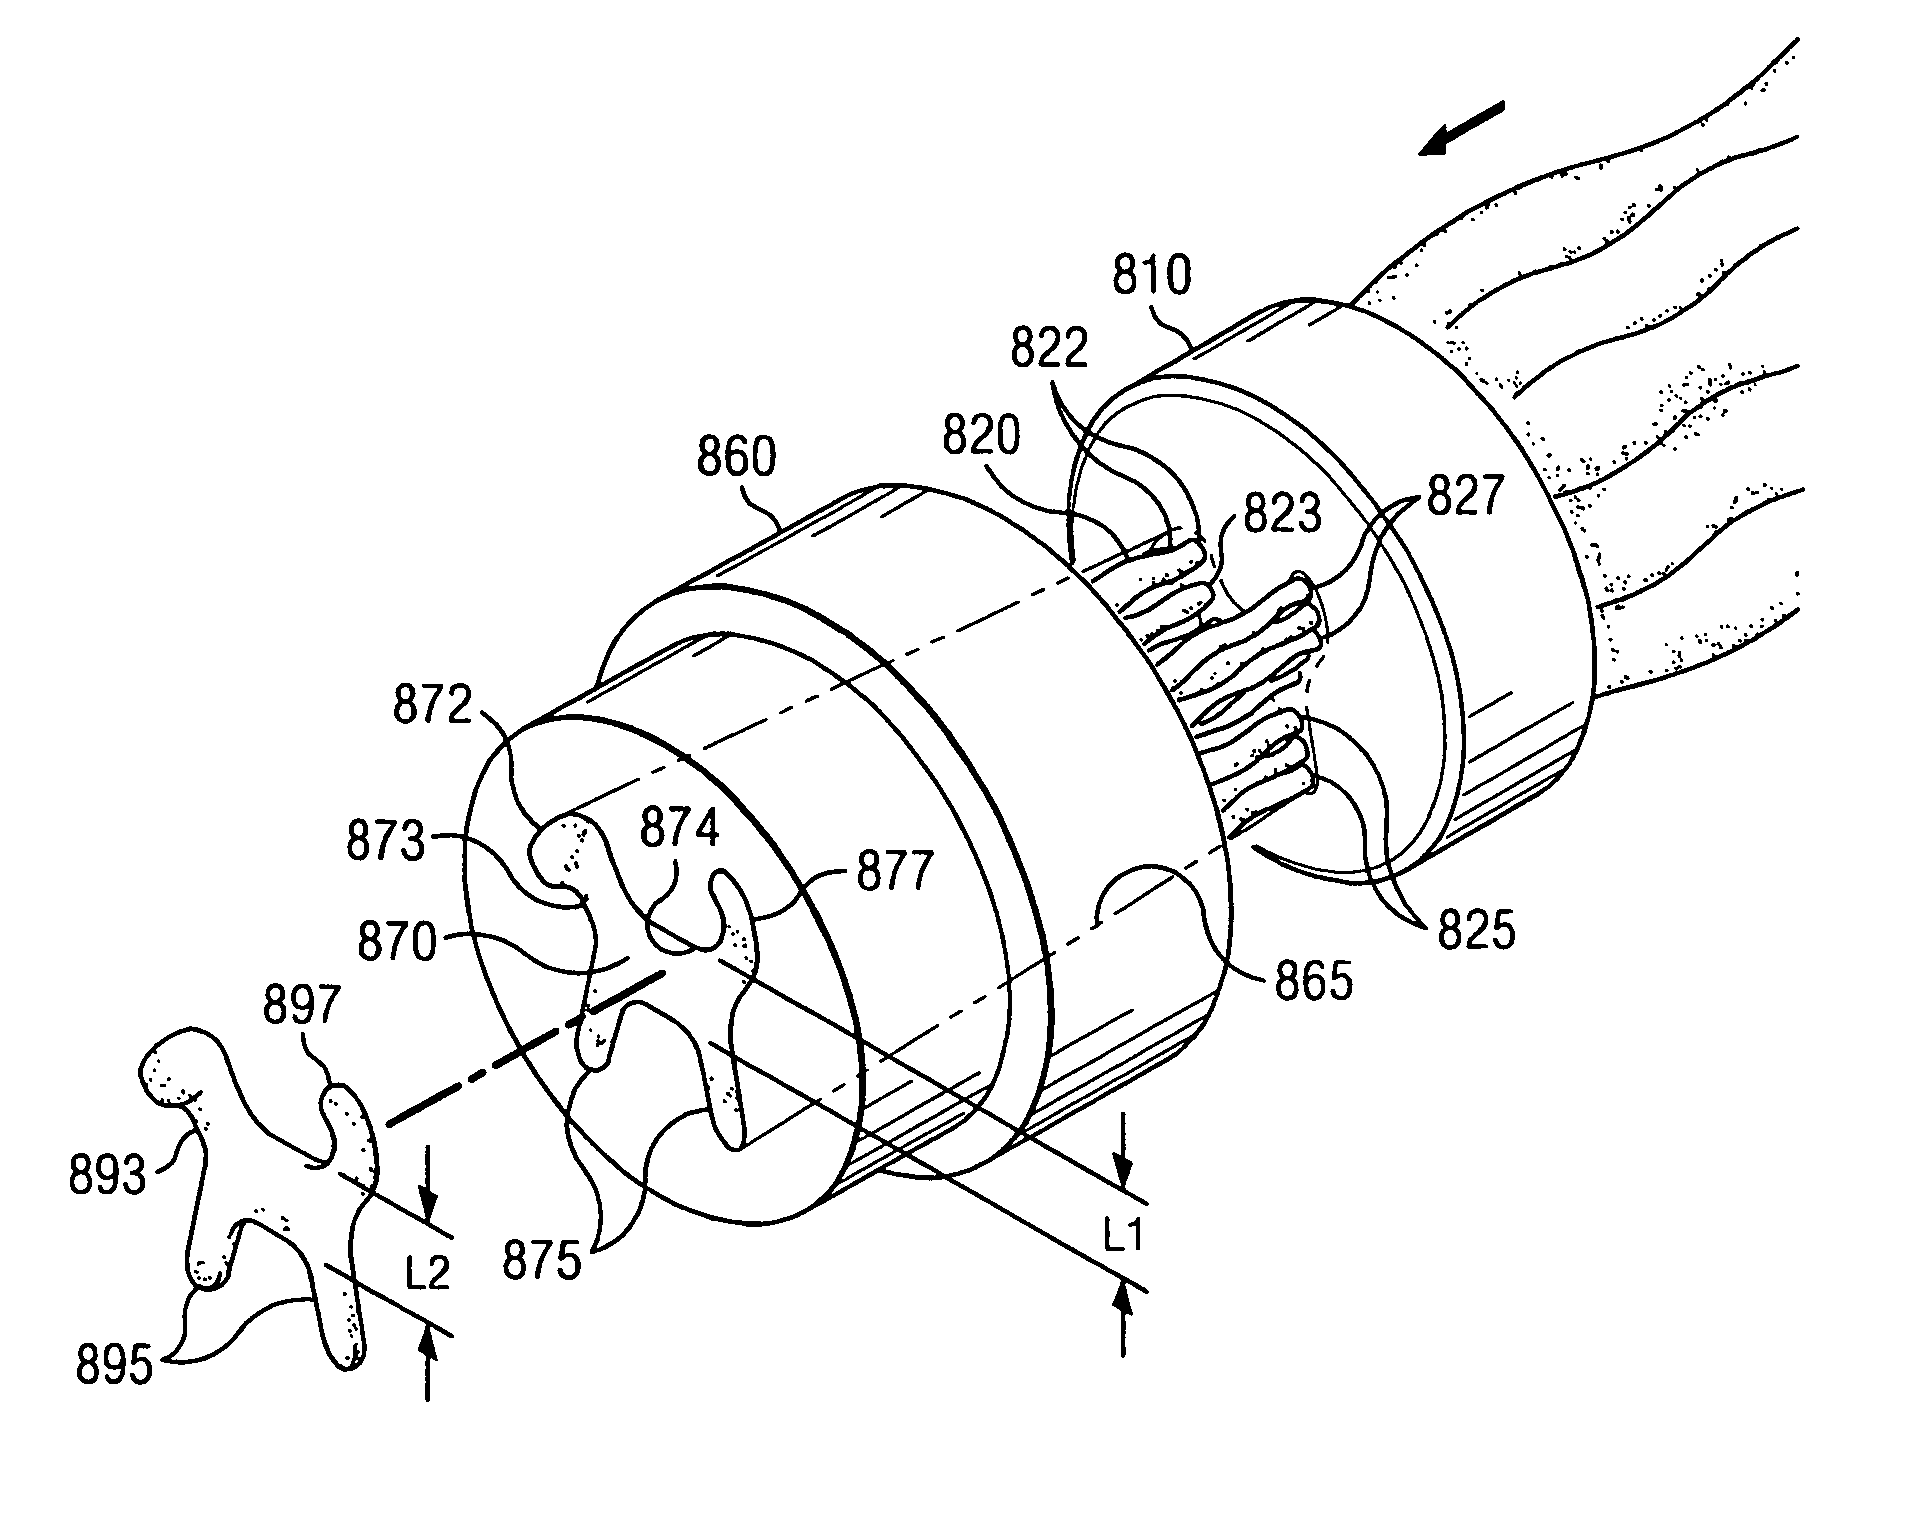 Apparatus and method for improving the dimensional quality of extruded food products having complex shapes